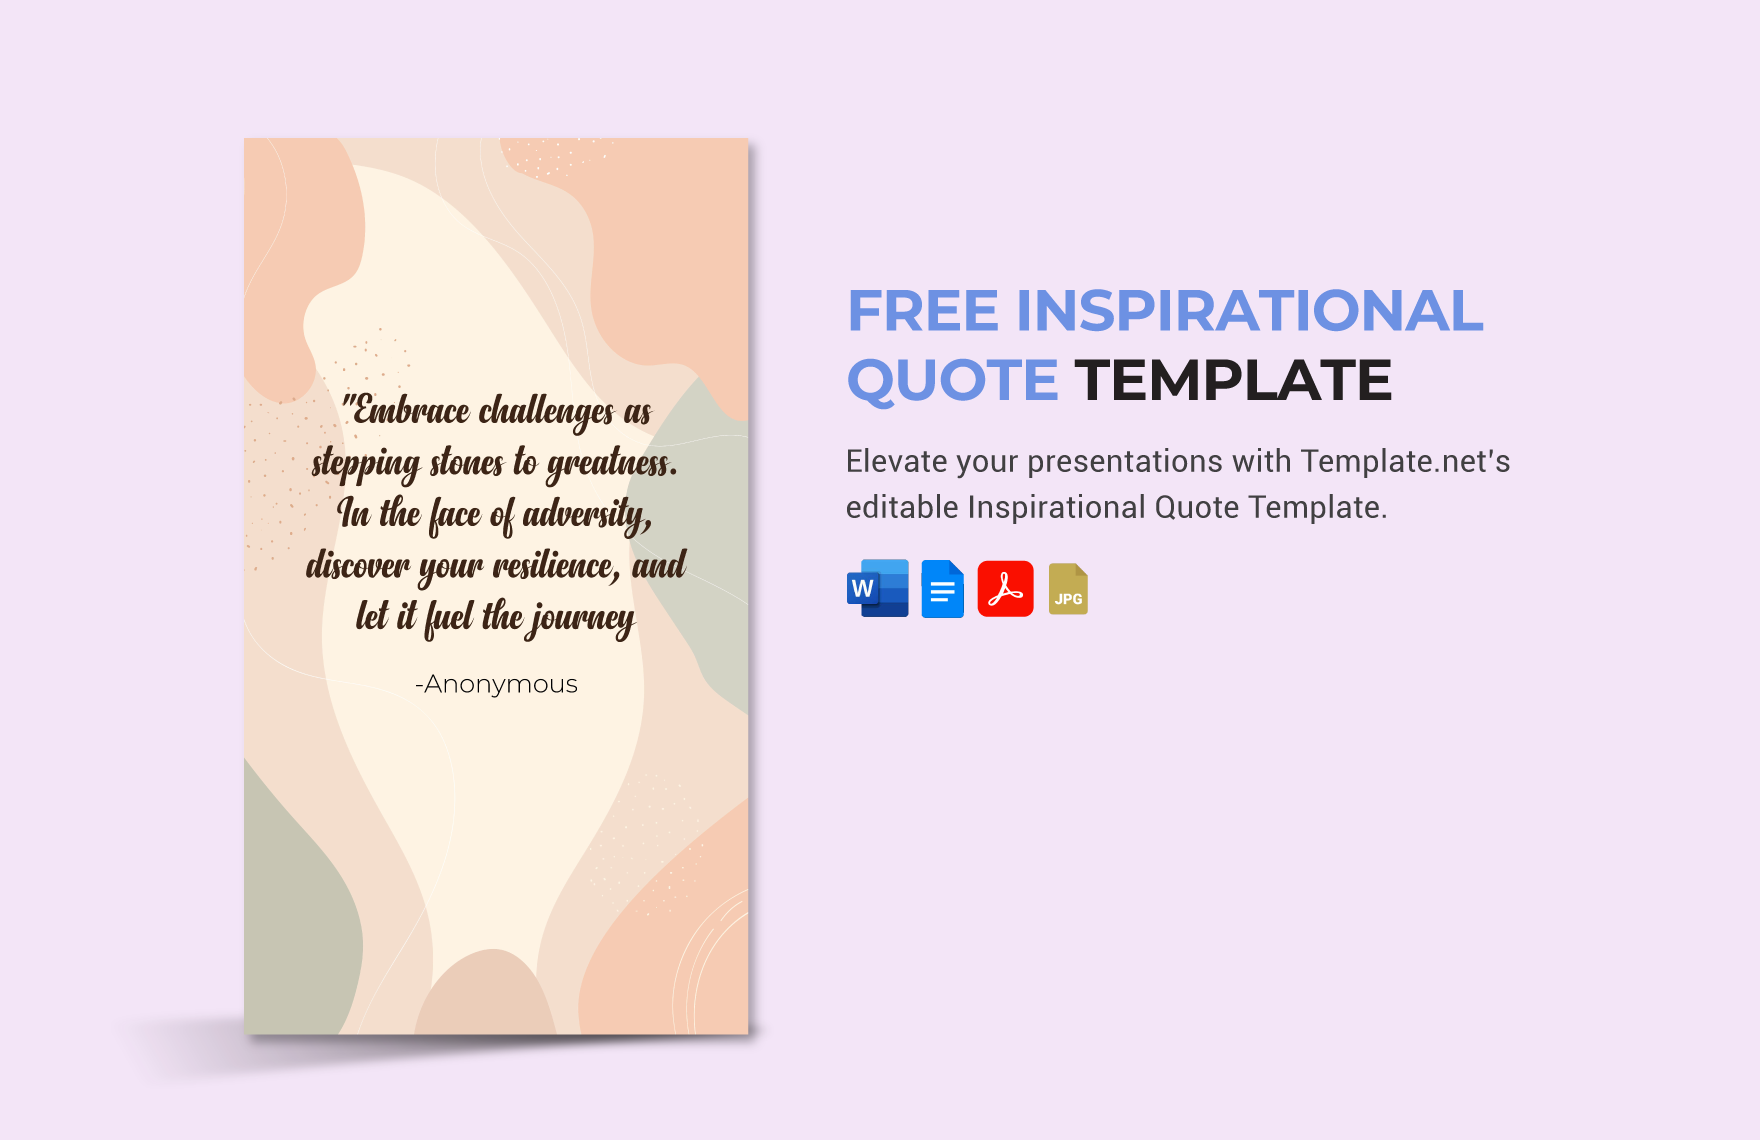 Free Inspirational Quote Template in Word, Google Docs, PDF, JPEG